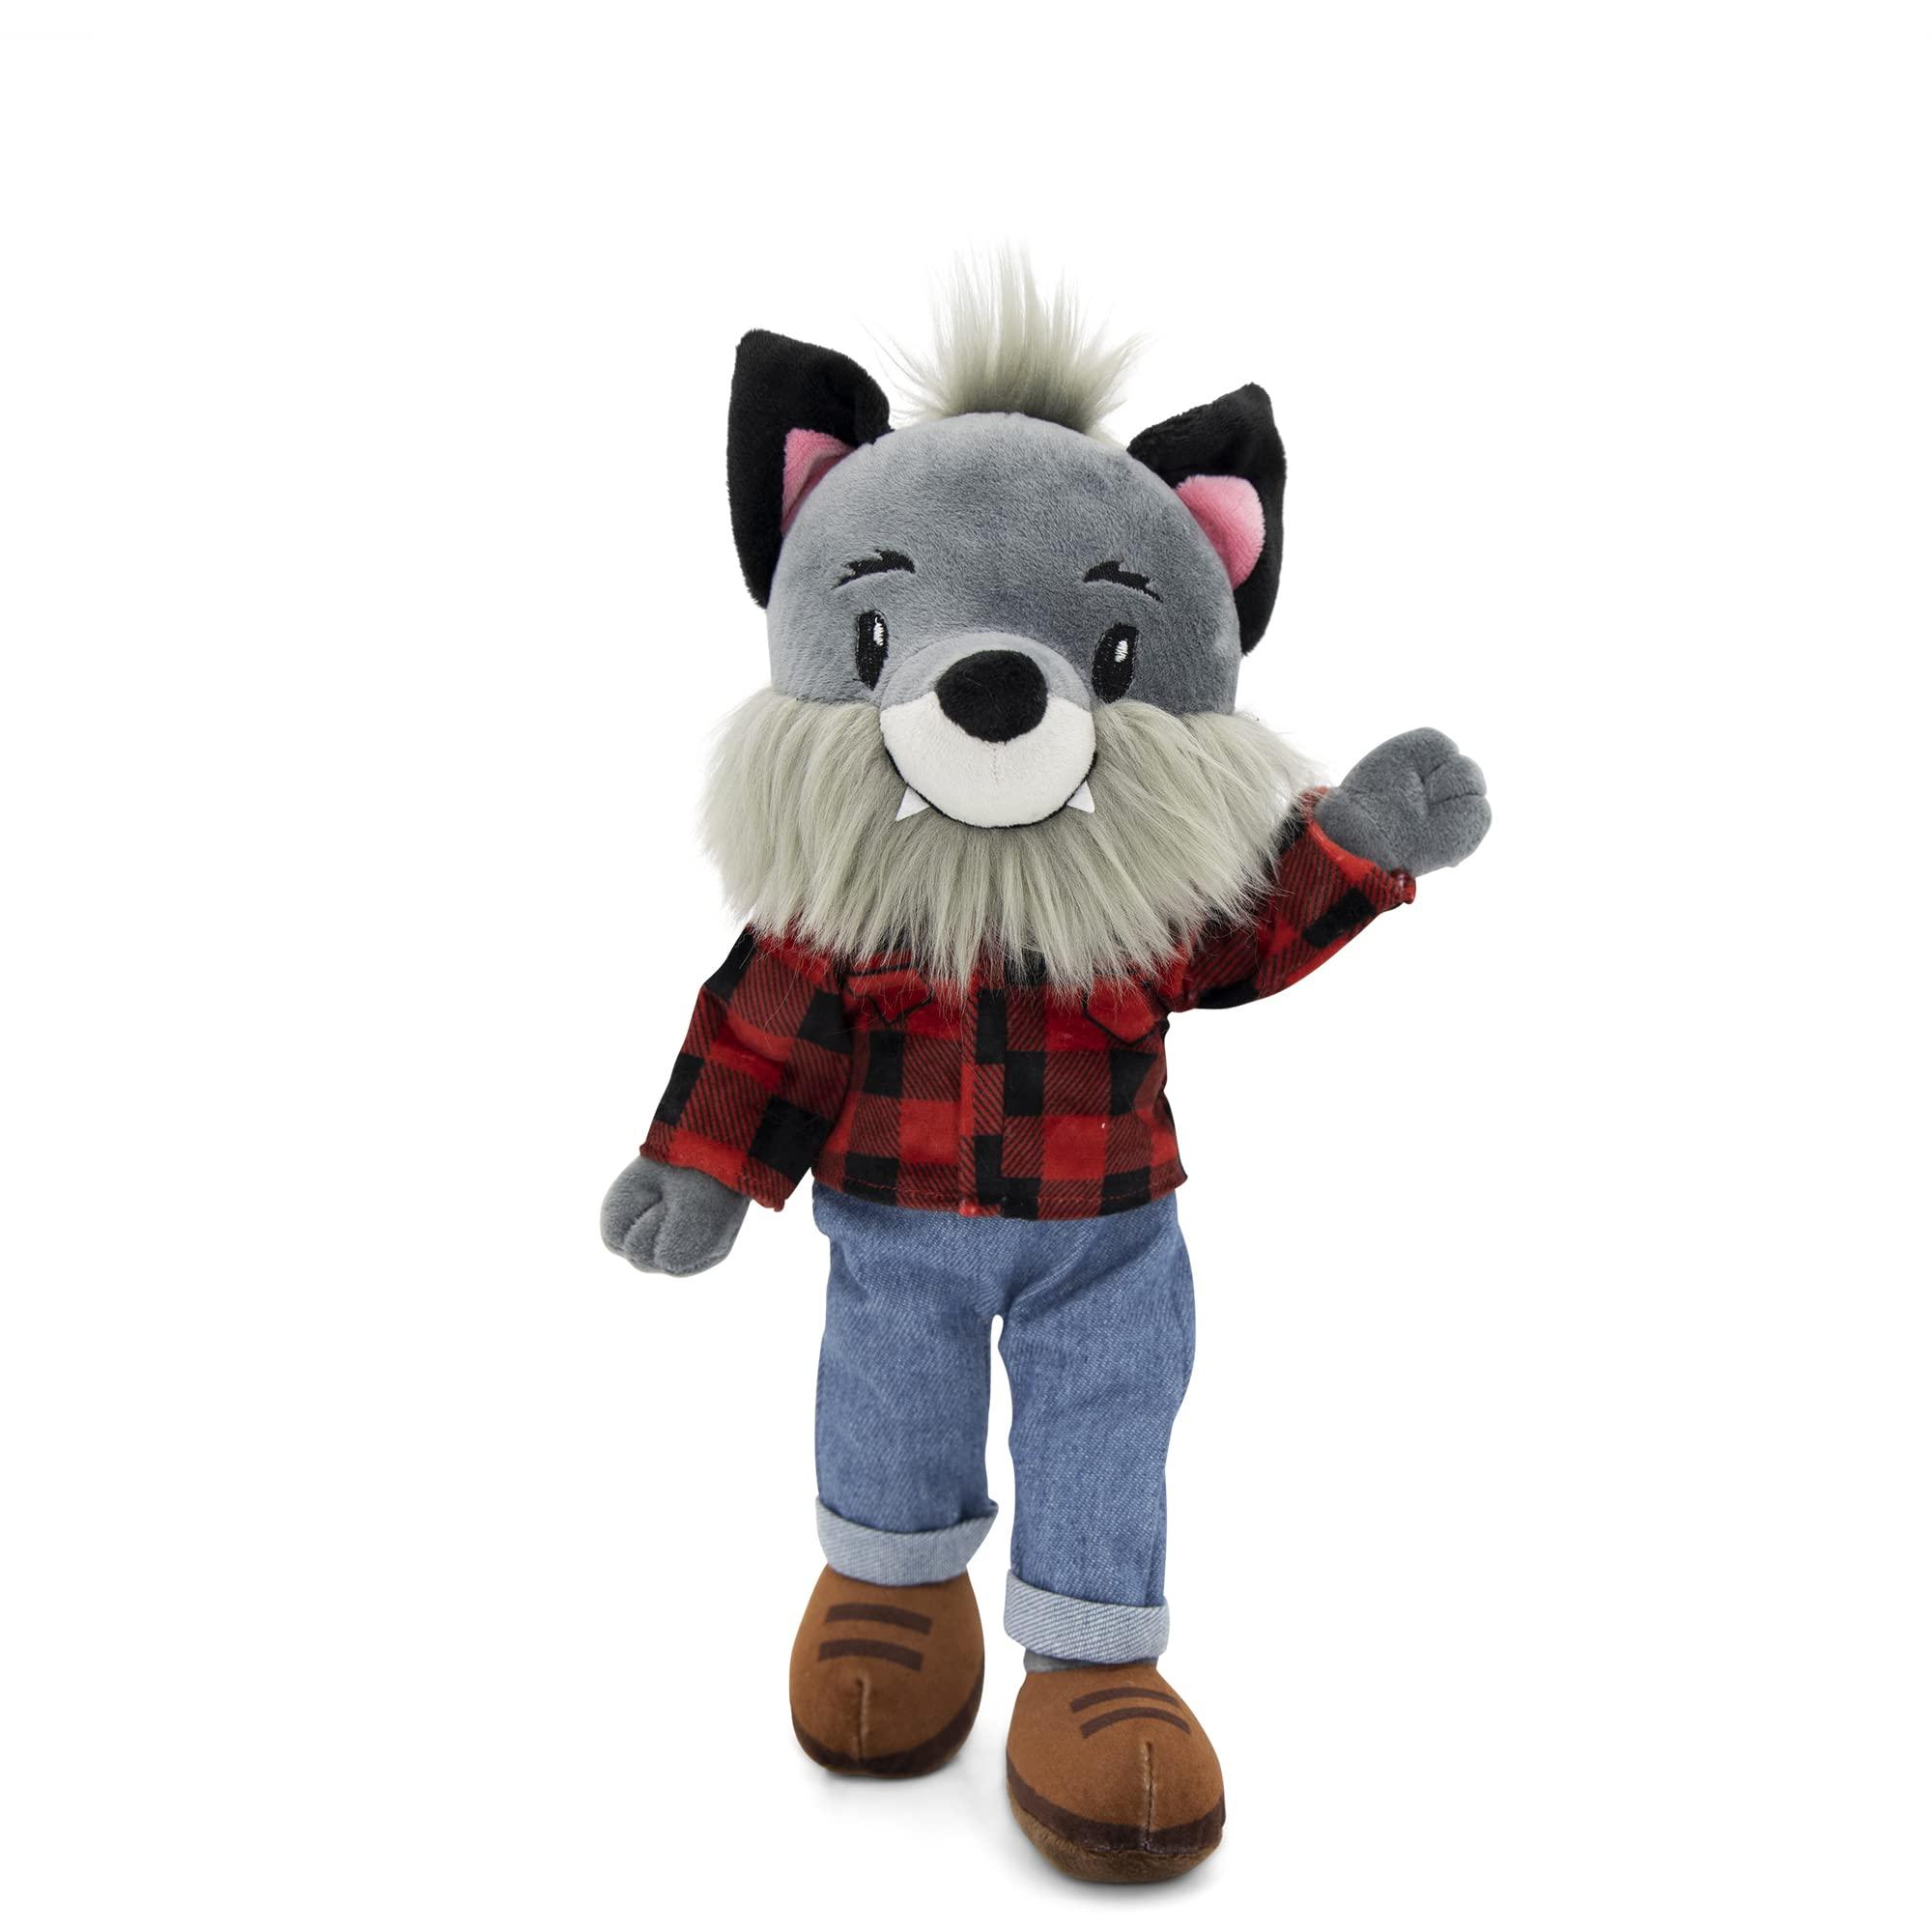 Sharewood Forest Friends 14 Inch Rag Doll Walter the Wolf - OrangeOnions Wholesale